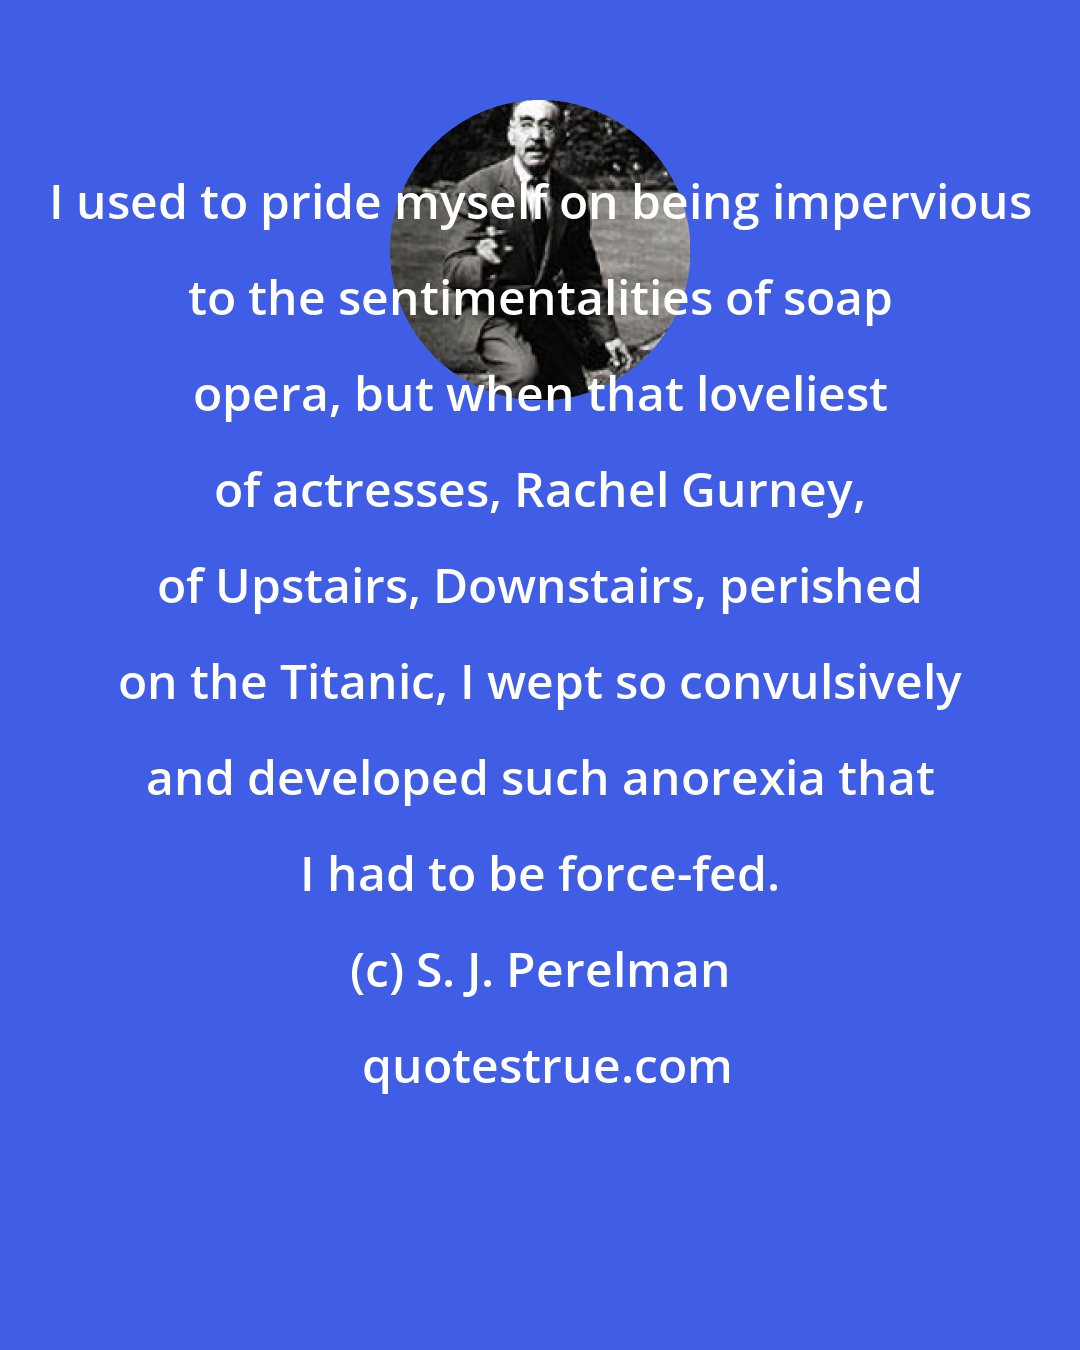 S. J. Perelman: I used to pride myself on being impervious to the sentimentalities of soap opera, but when that loveliest of actresses, Rachel Gurney, of Upstairs, Downstairs, perished on the Titanic, I wept so convulsively and developed such anorexia that I had to be force-fed.